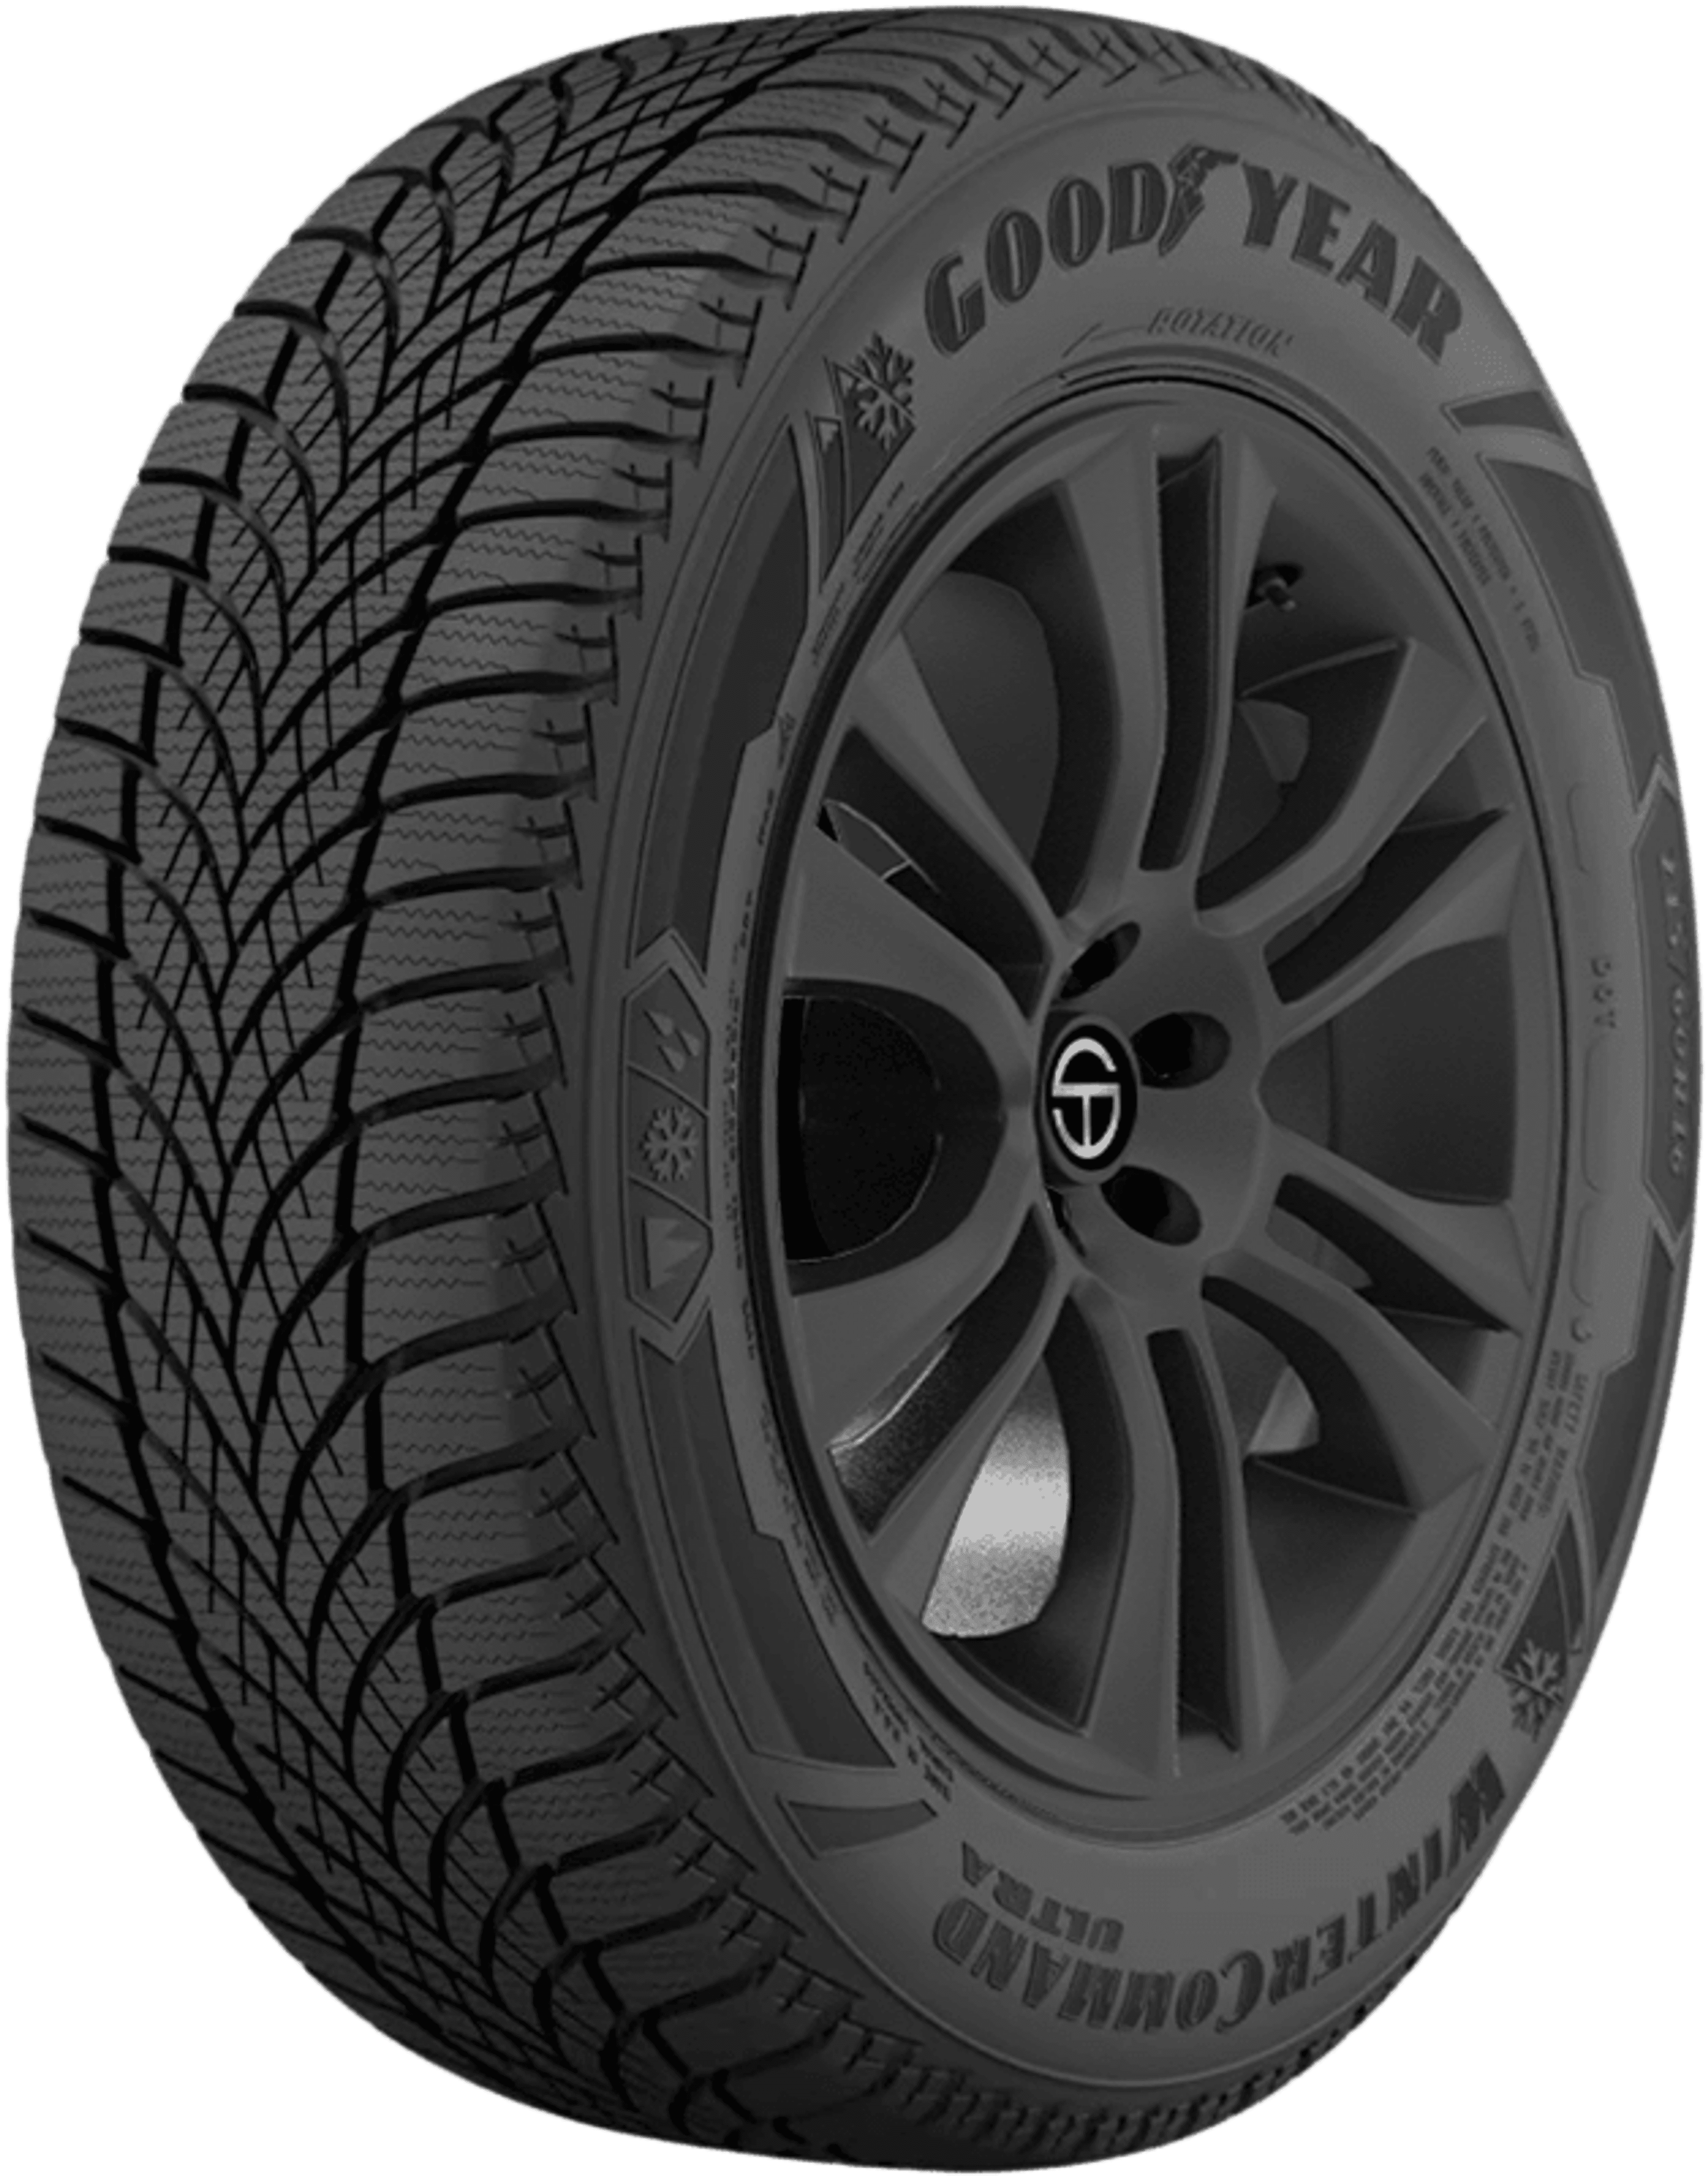 Buy Online Goodyear Ultra Command SimpleTire | Winter Tires